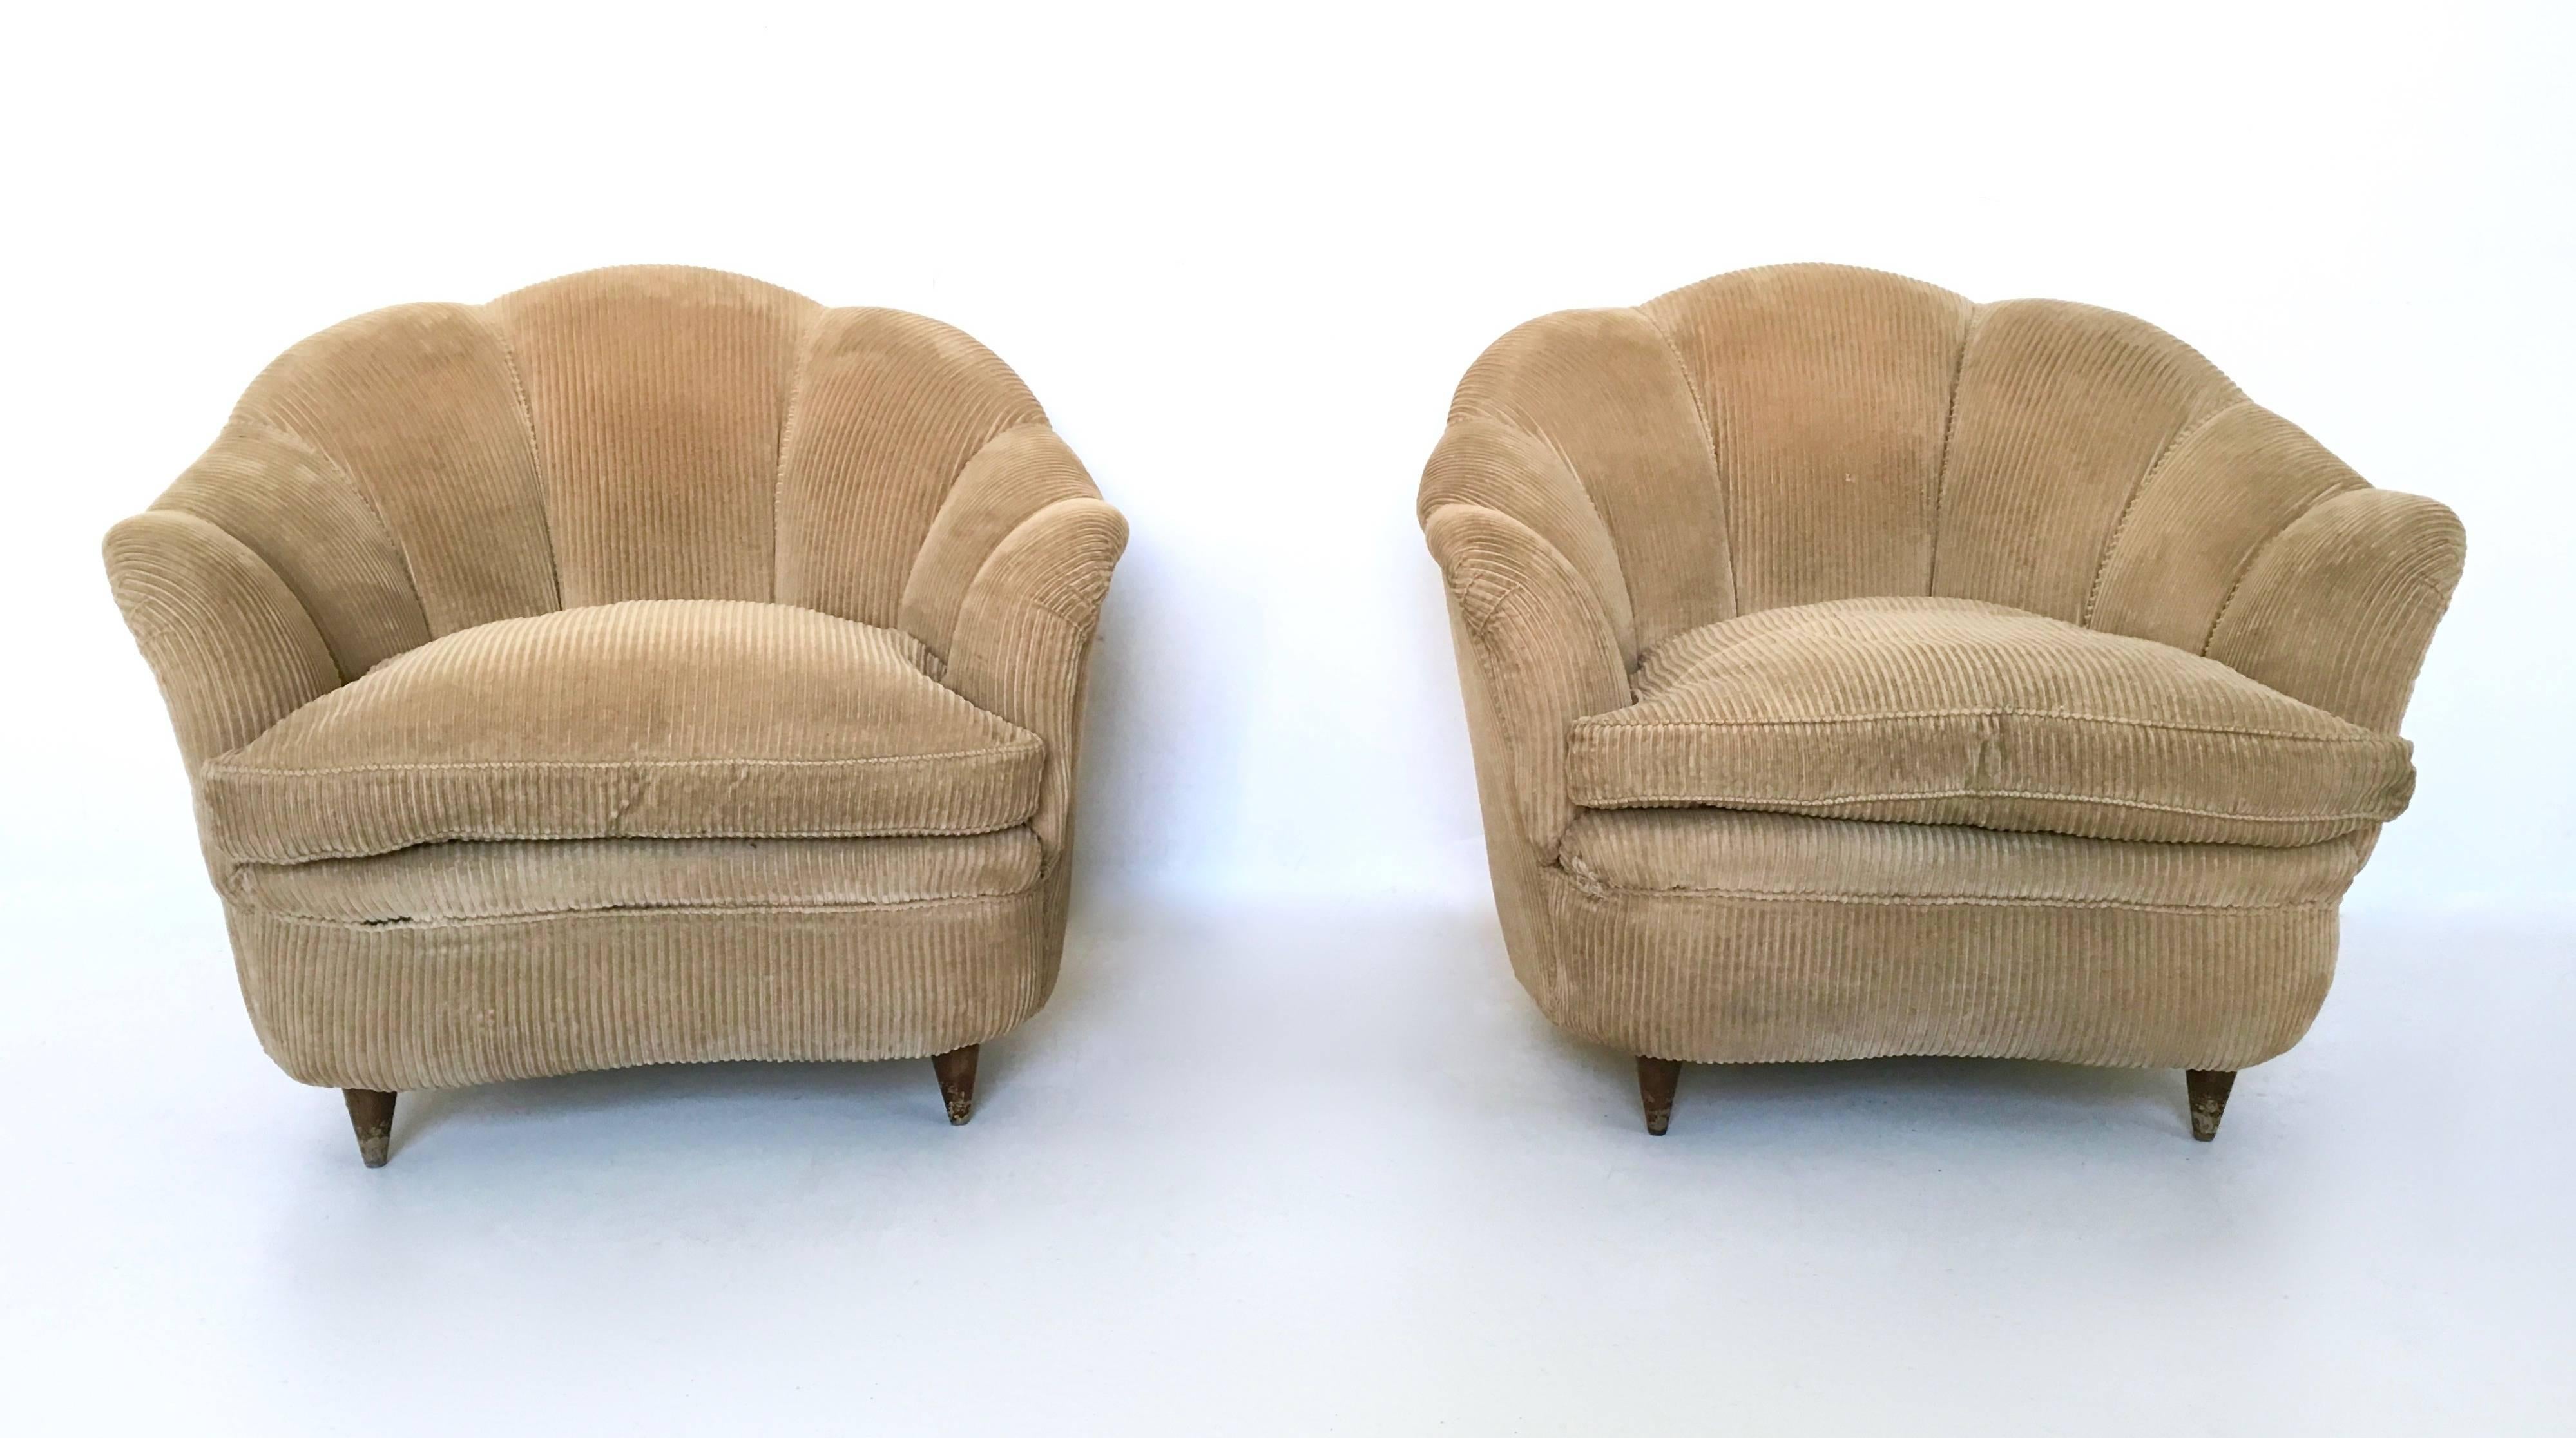 Pair of Italian velvet armchairs attributed to Guglielmo Ulrich, 1940s-1950s. Covered in velvet.
In fair condition.